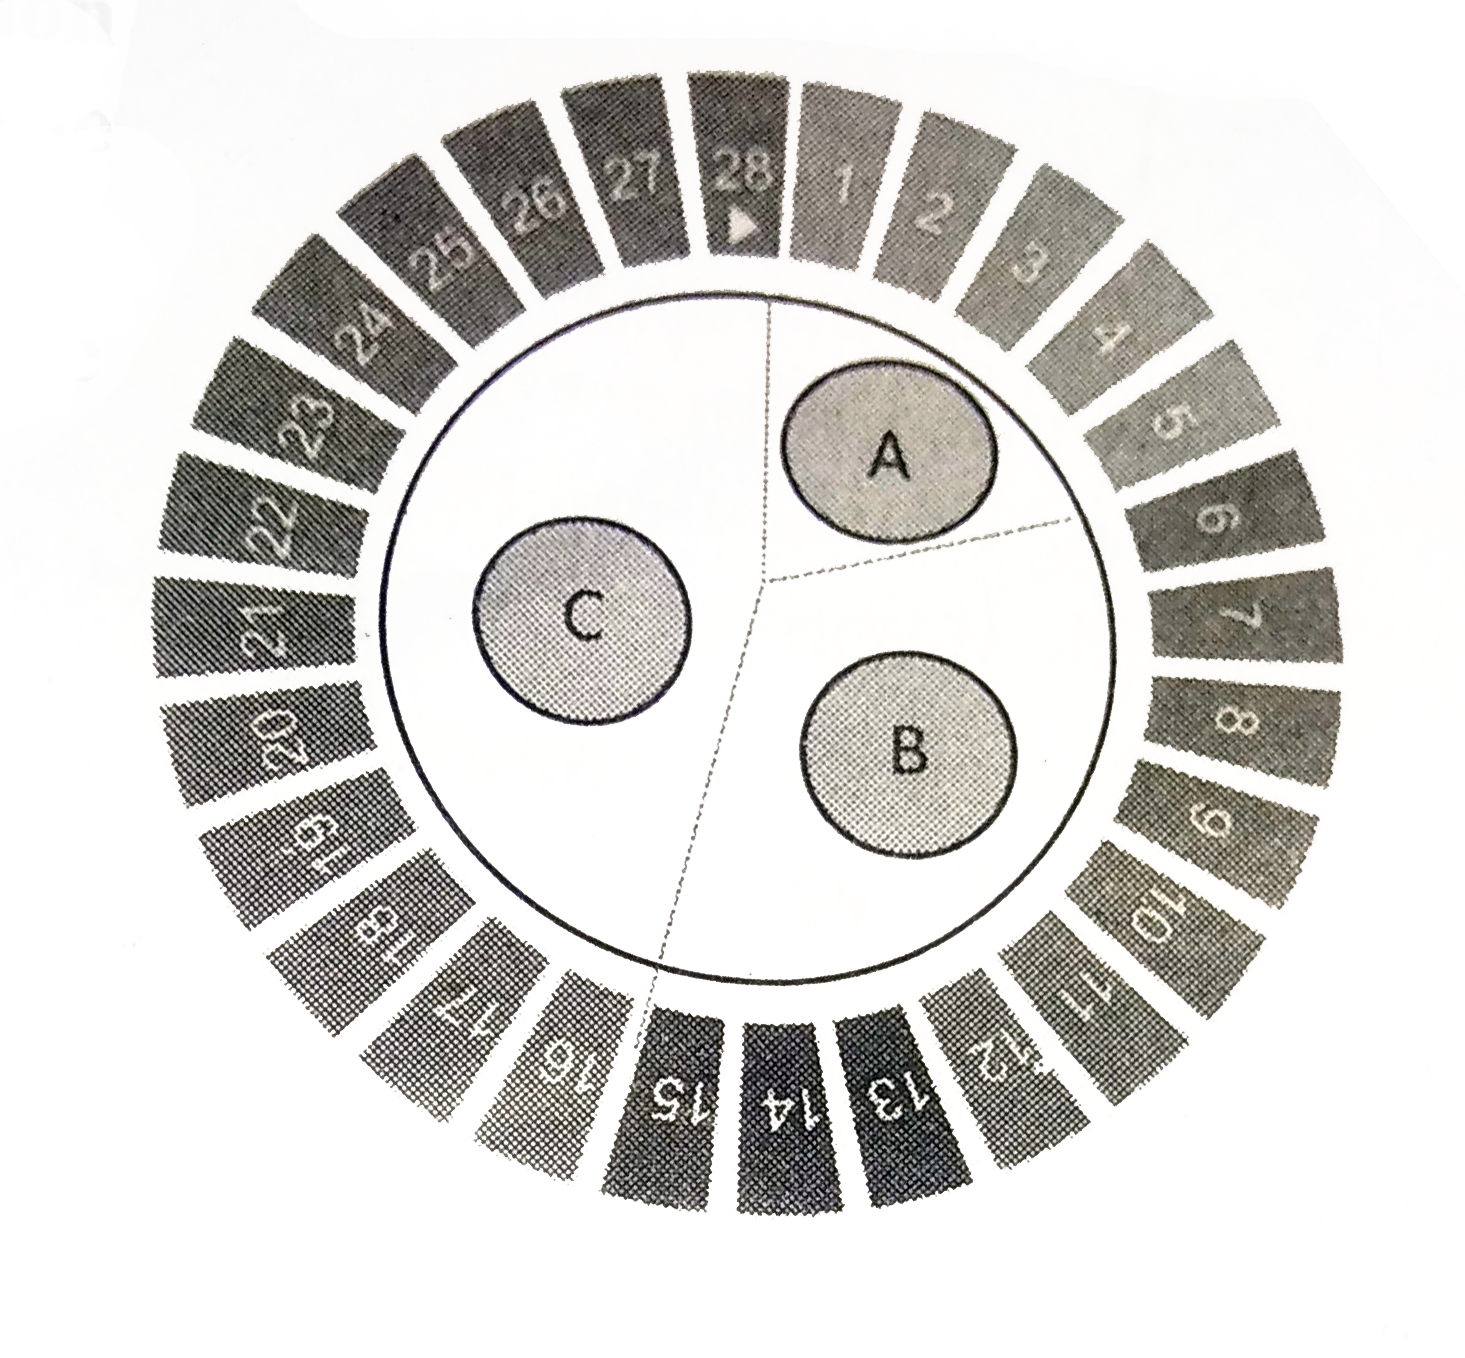 The given figure shows the schematic representation of menstrual cycle in human female. What does the alphabets A,B,C indicates with regard to the cycle?